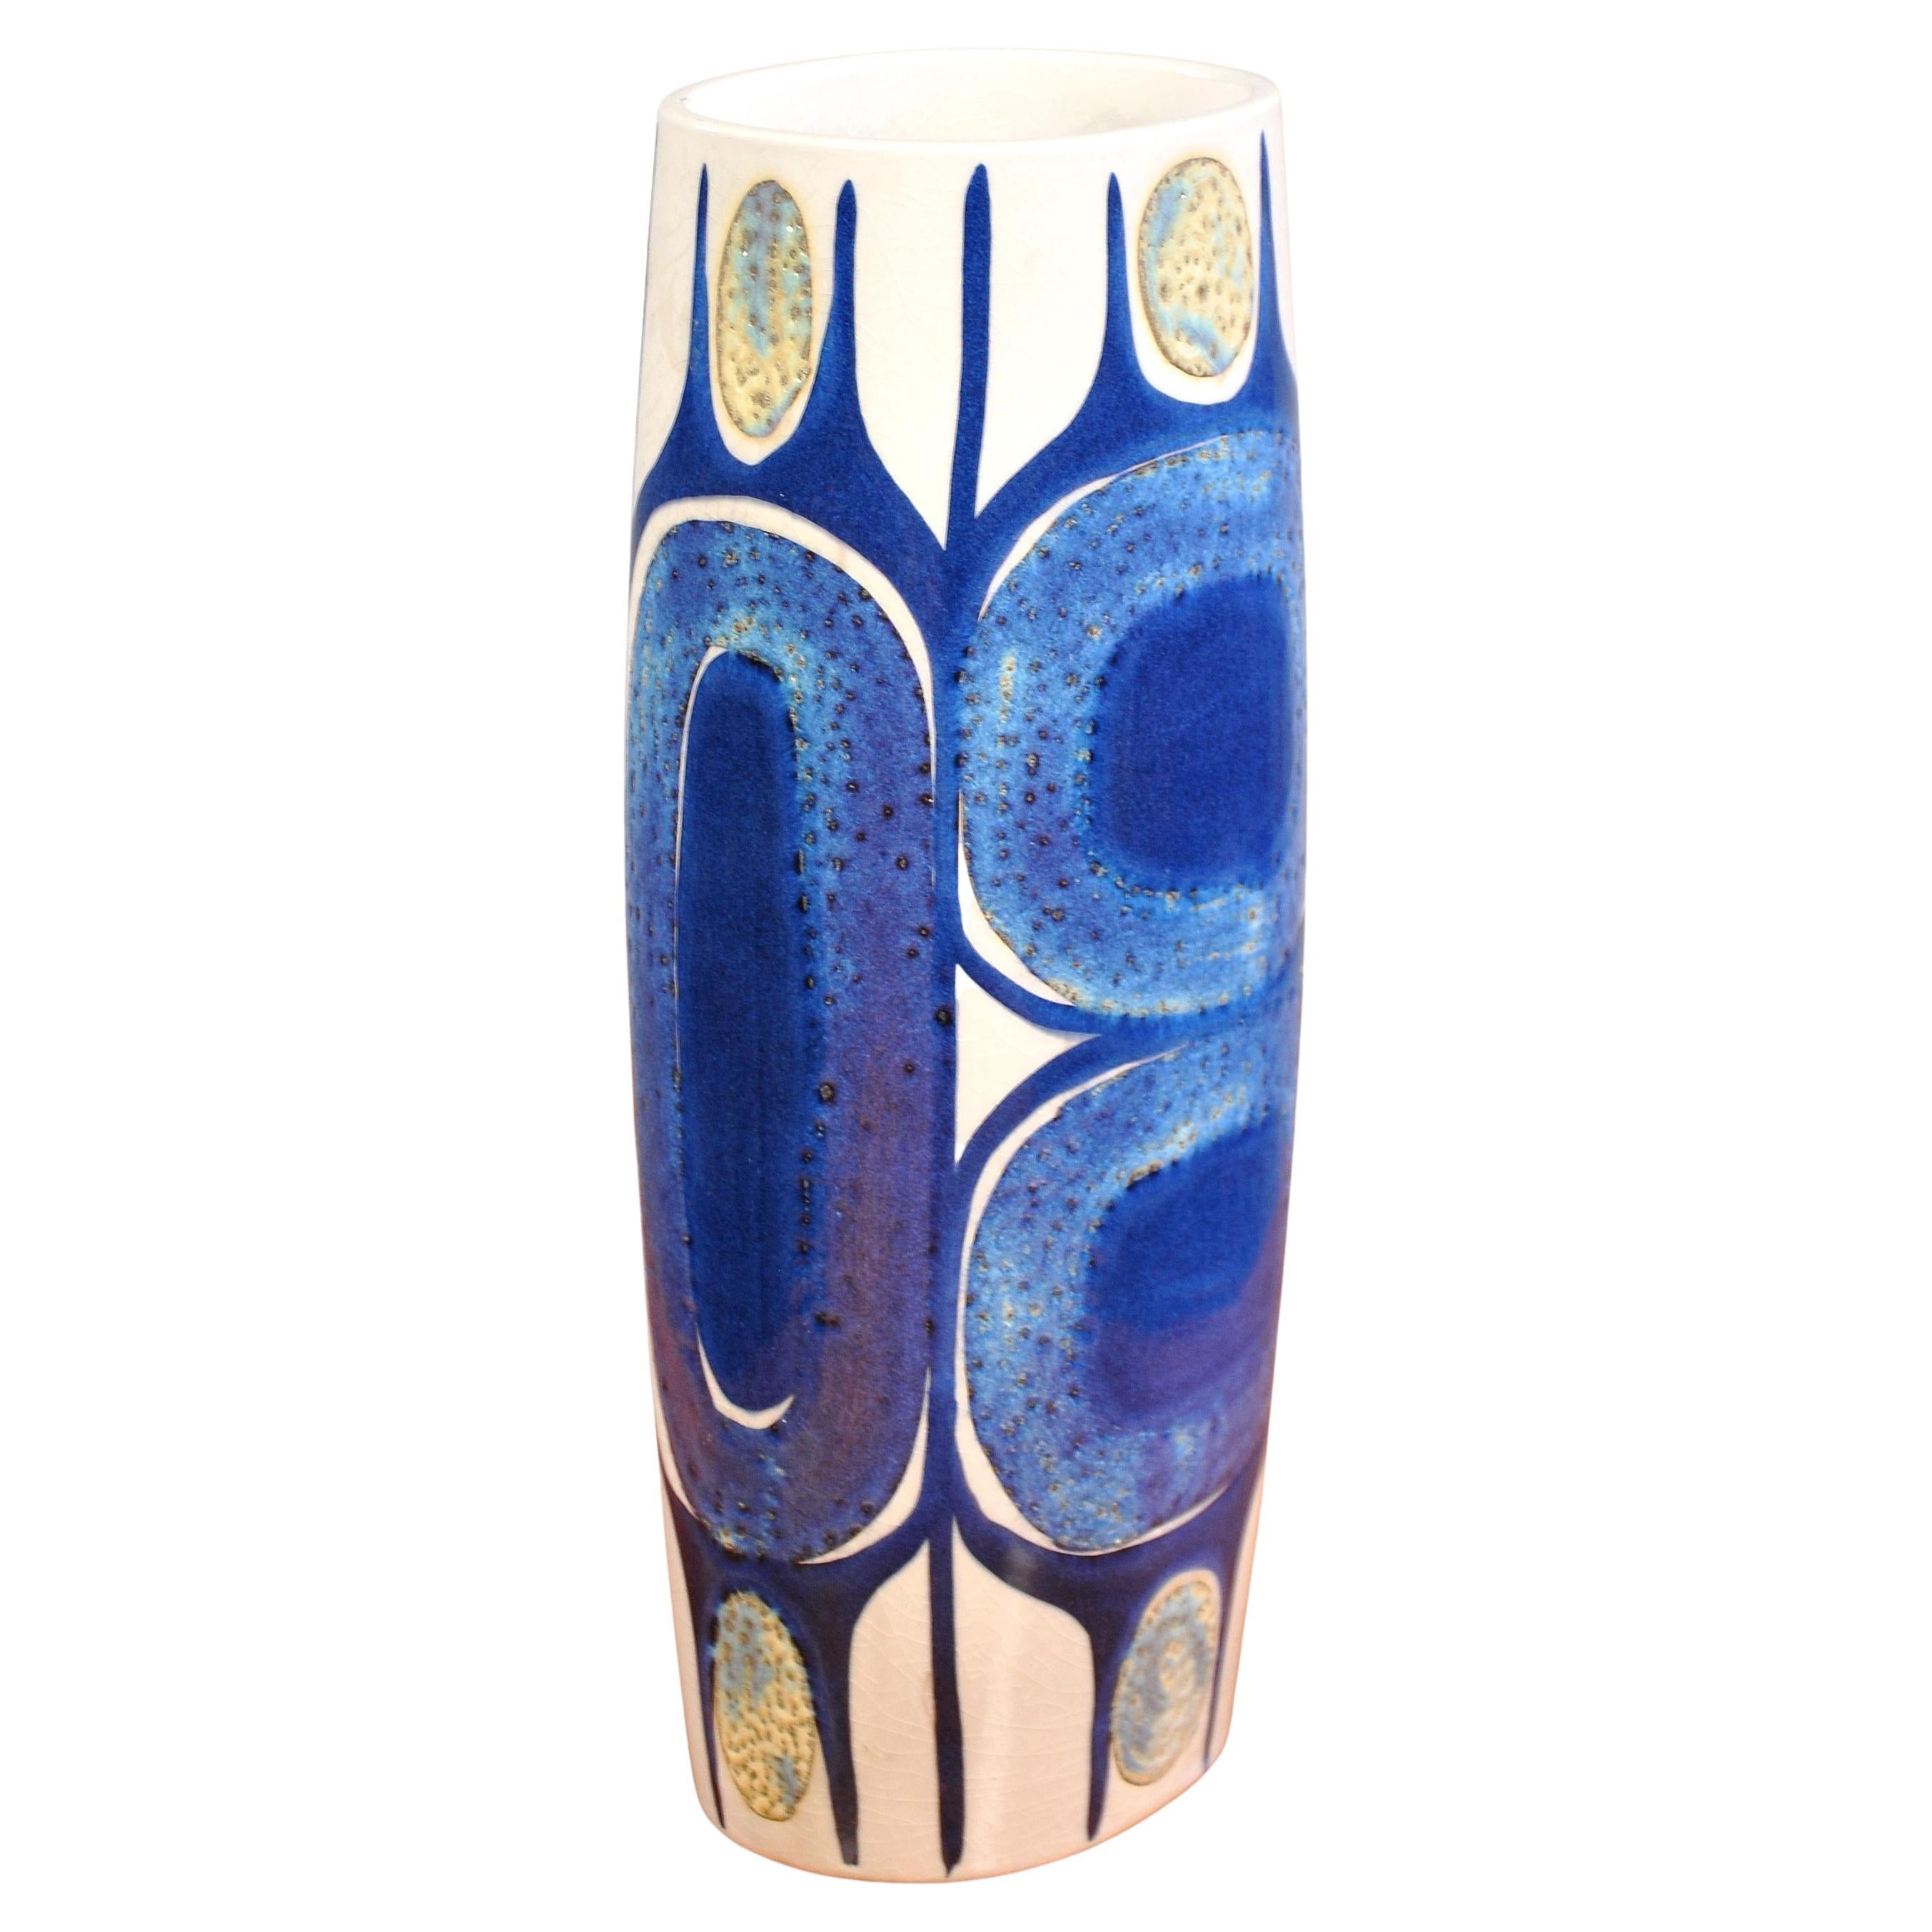 This exquisite Danish Modern vase from the Tenera line by Royal Copenhagen (Aluminia) was designed by Inge-Lise Koefoed in the 1960s. The glazed ceramic vase features hand-painted motifs in shades of deep blue, purple, and shimmering pale yellows or